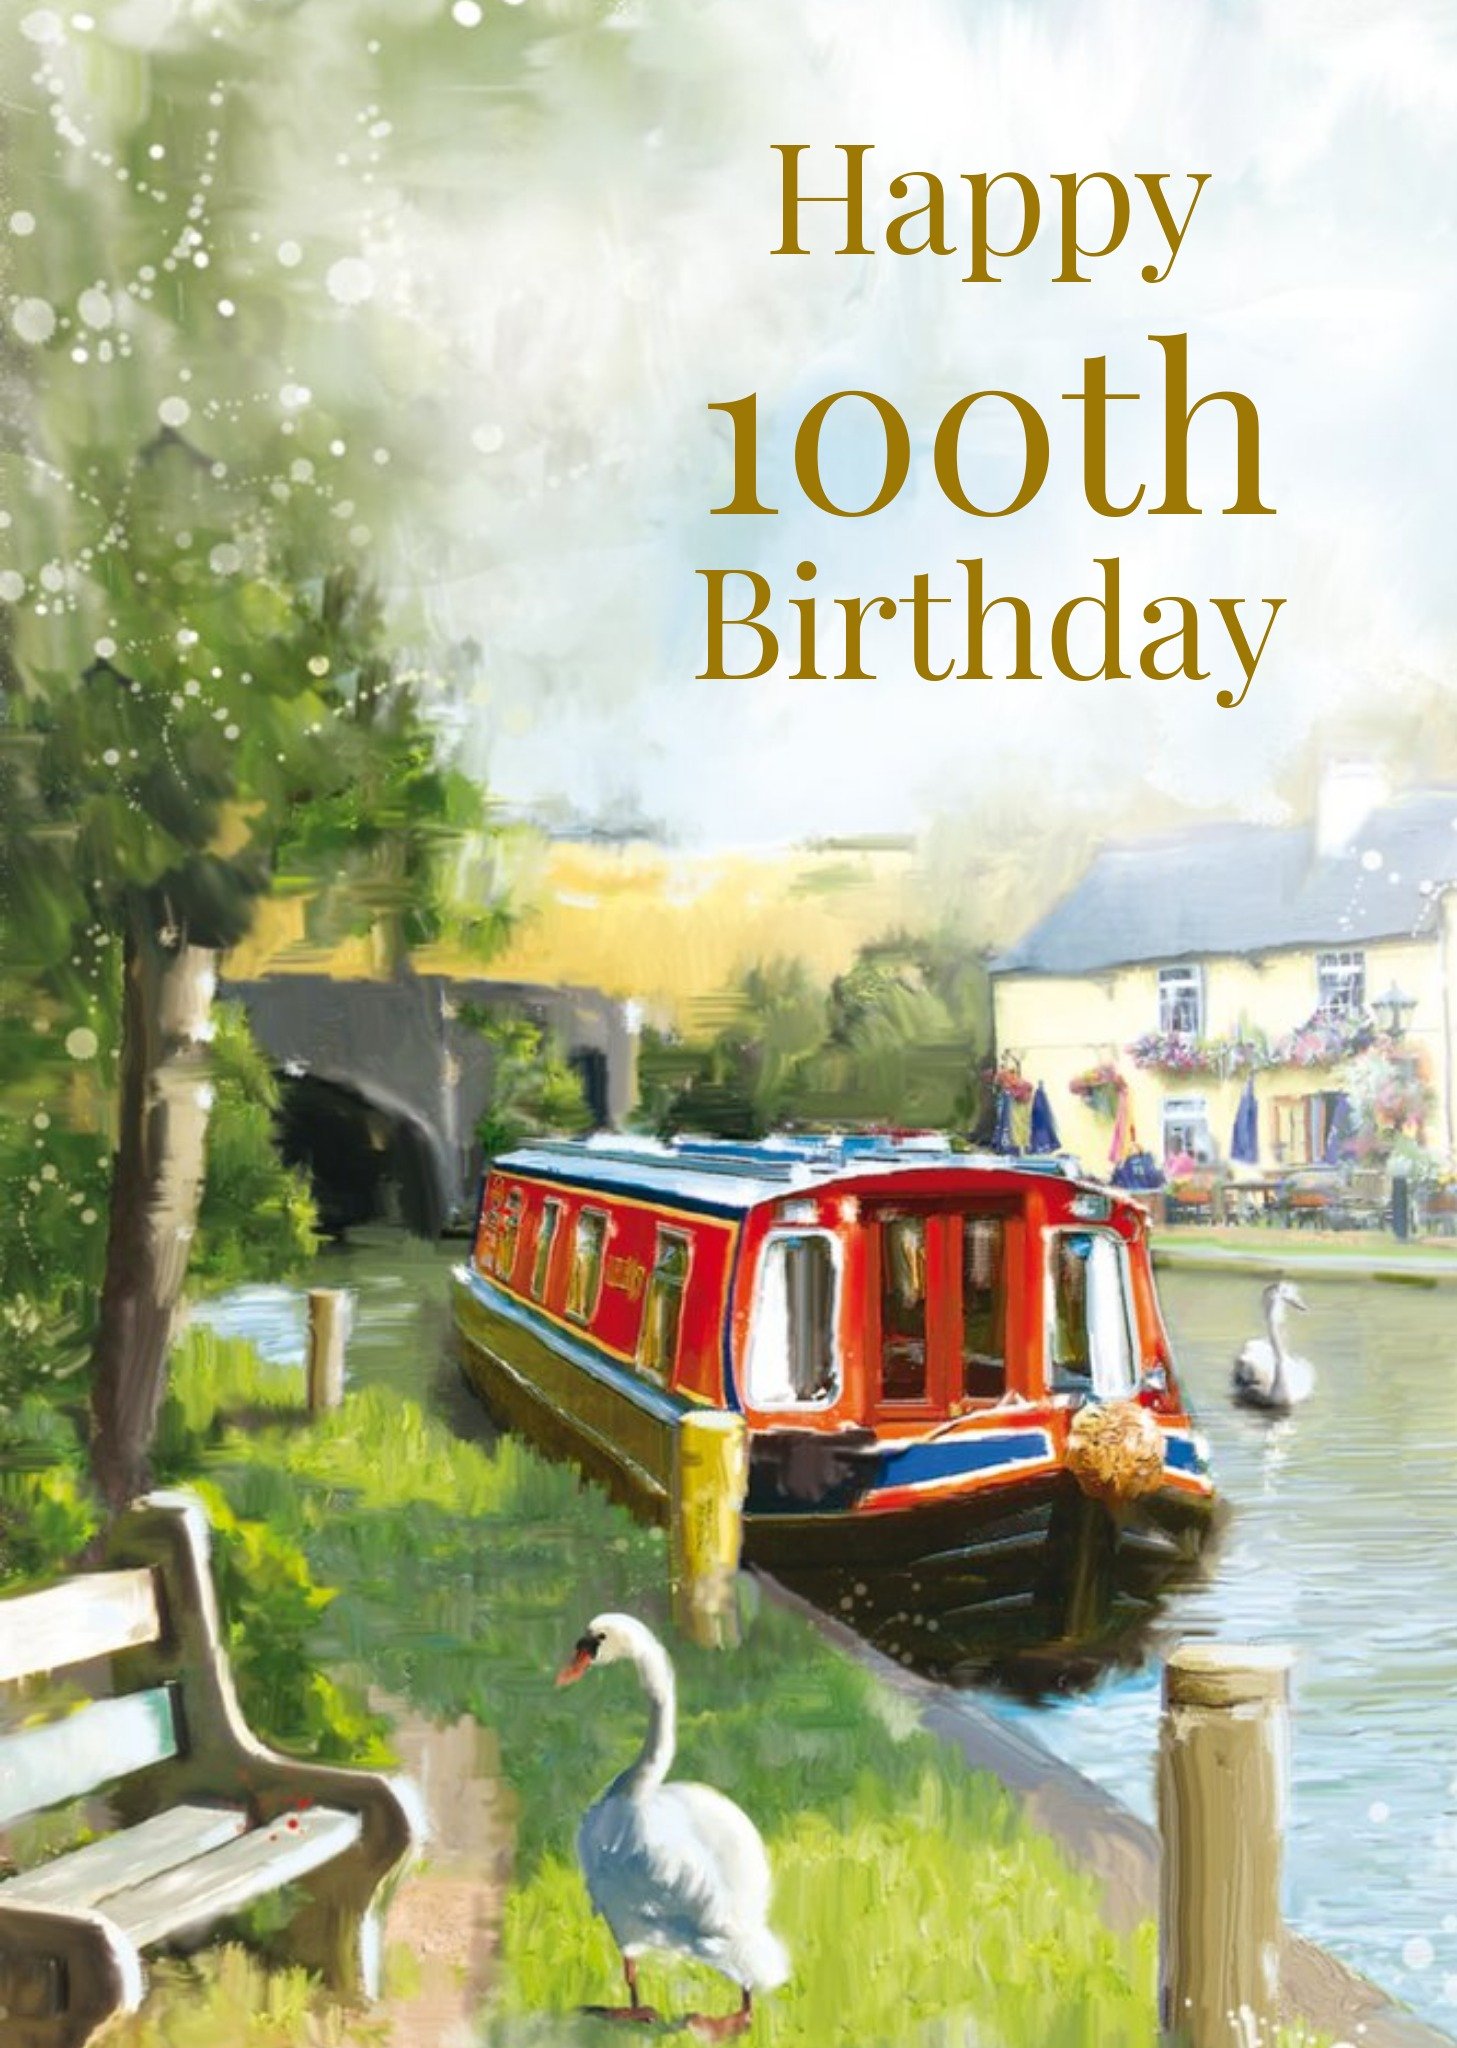 Ling Design Traditional Canal Boat Scene Happy 100th Birthday Card Ecard